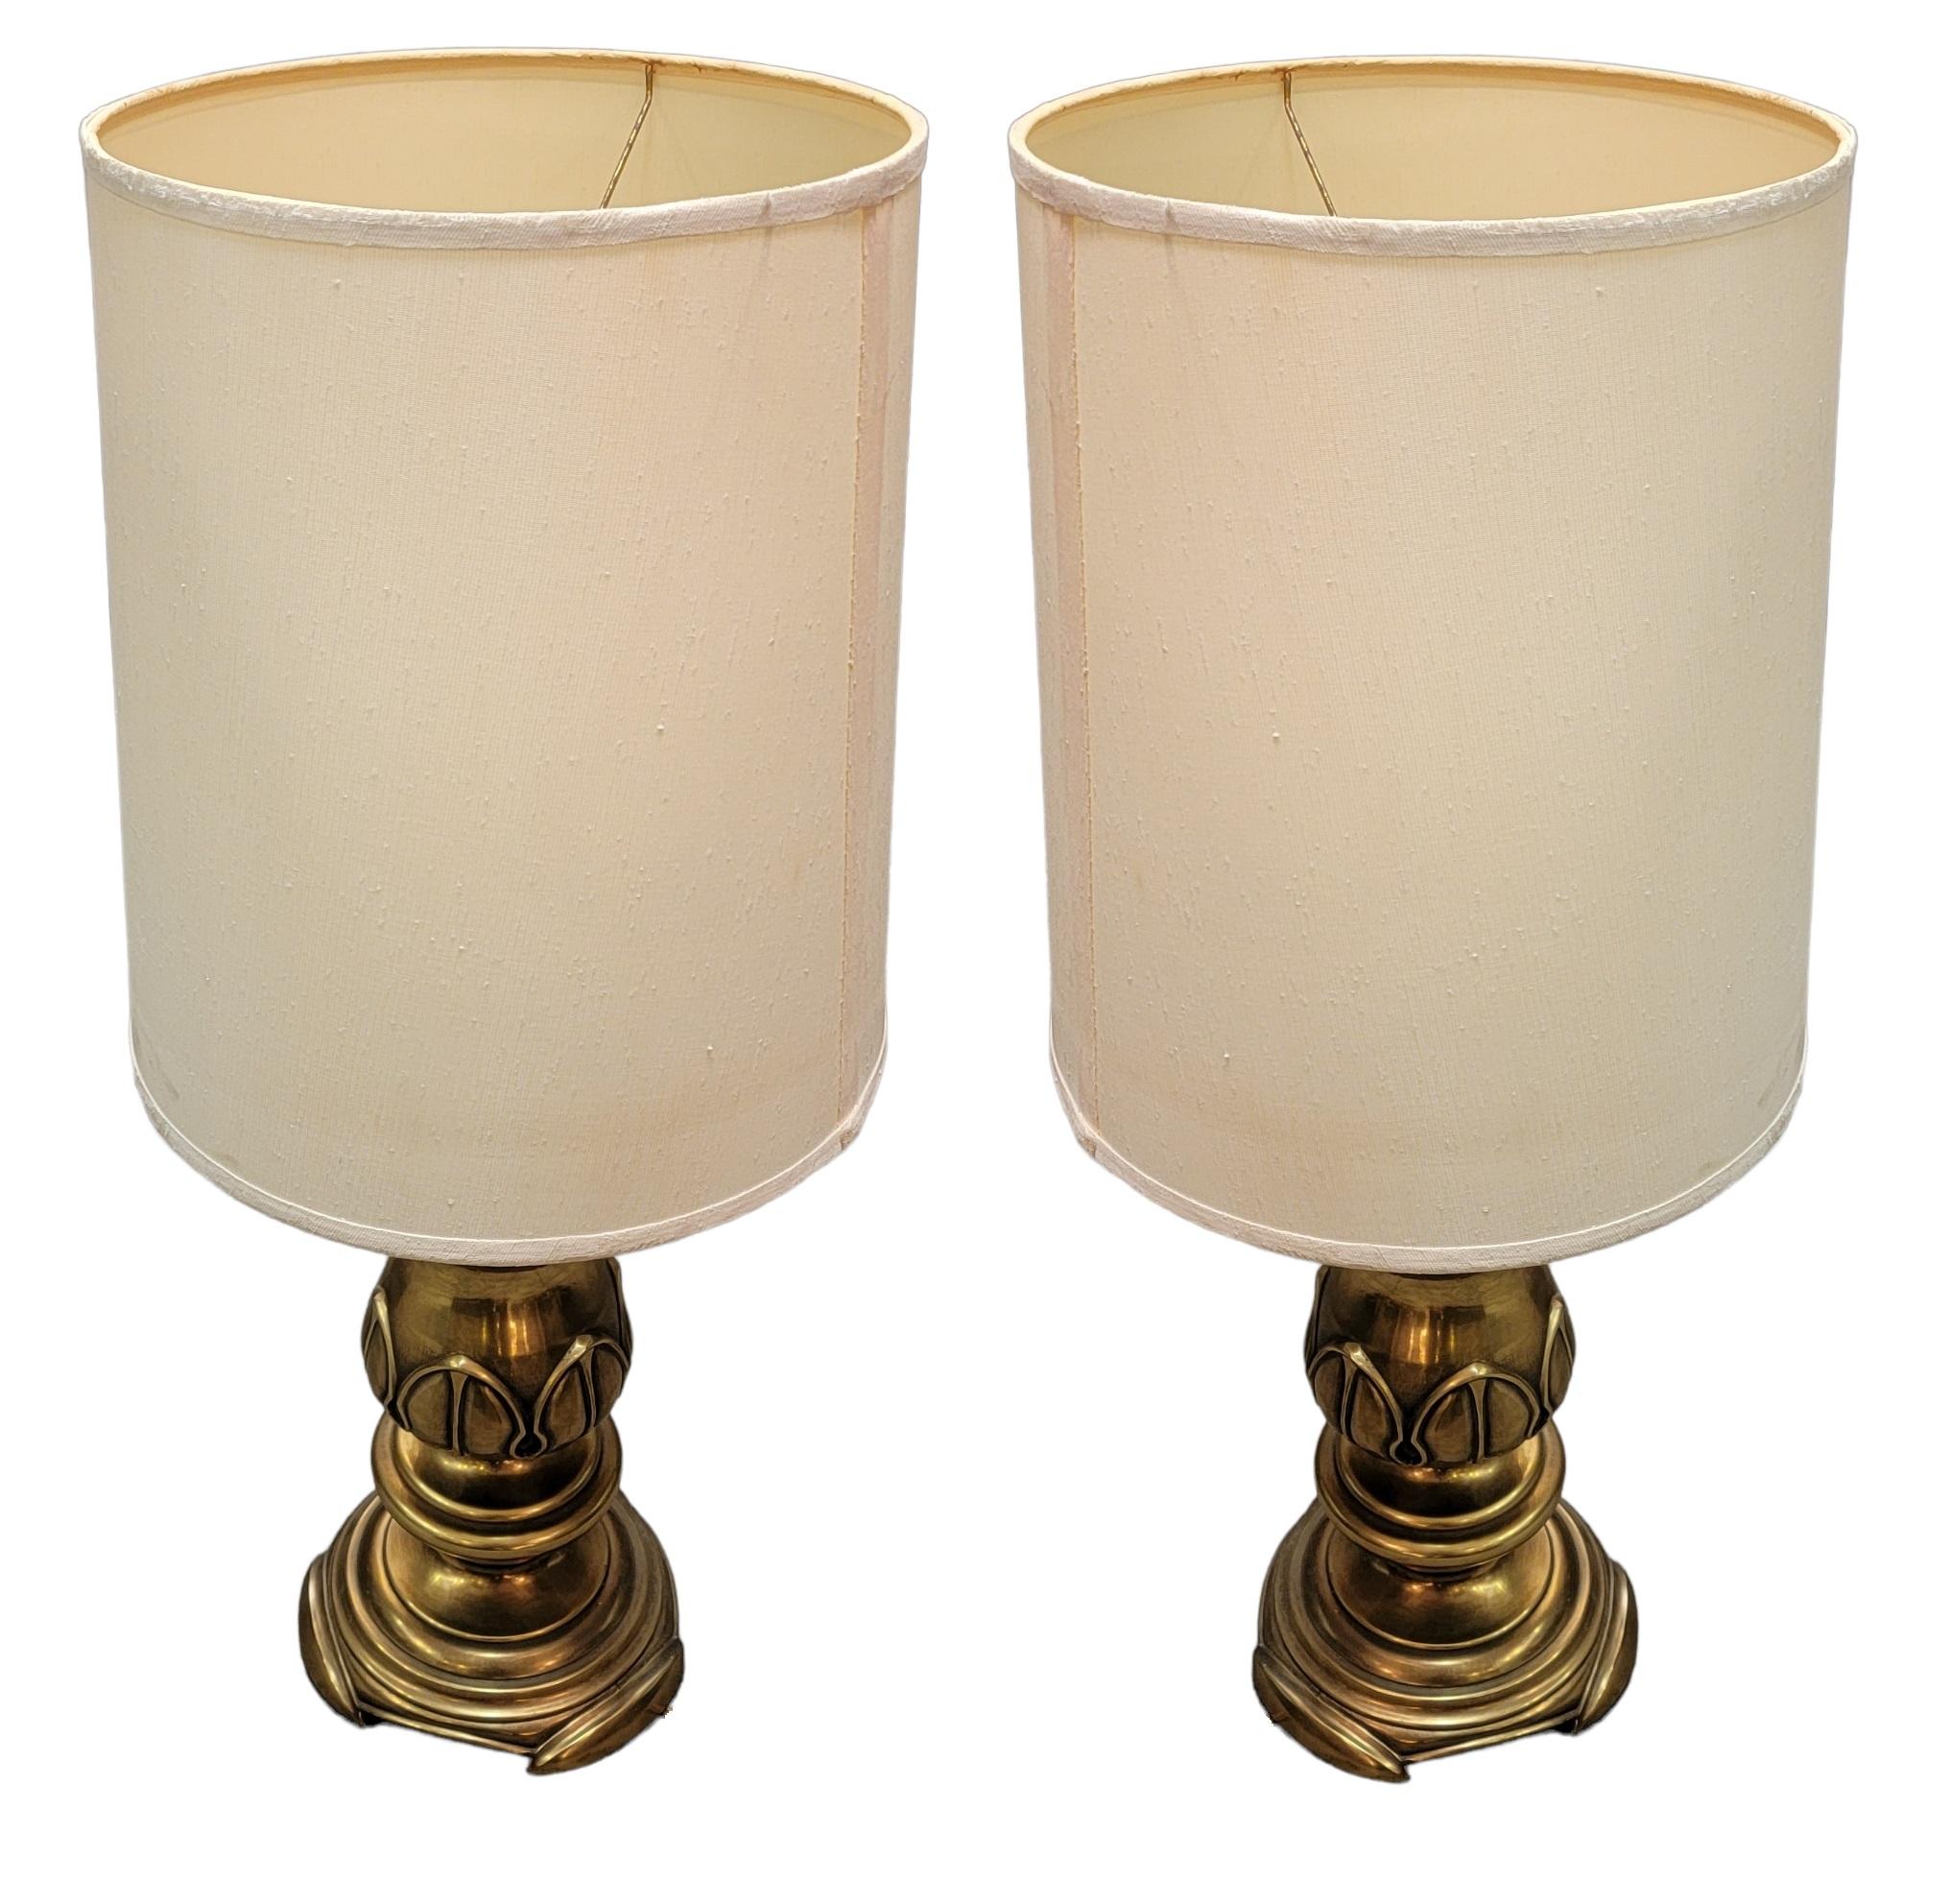 Pair of Bronze Stifle Table lamps with linen lamp shades. The base is a nice thick base that offers stability. The weight of the lamps matches the size. Each bronze table lamp is tested and found in working order.